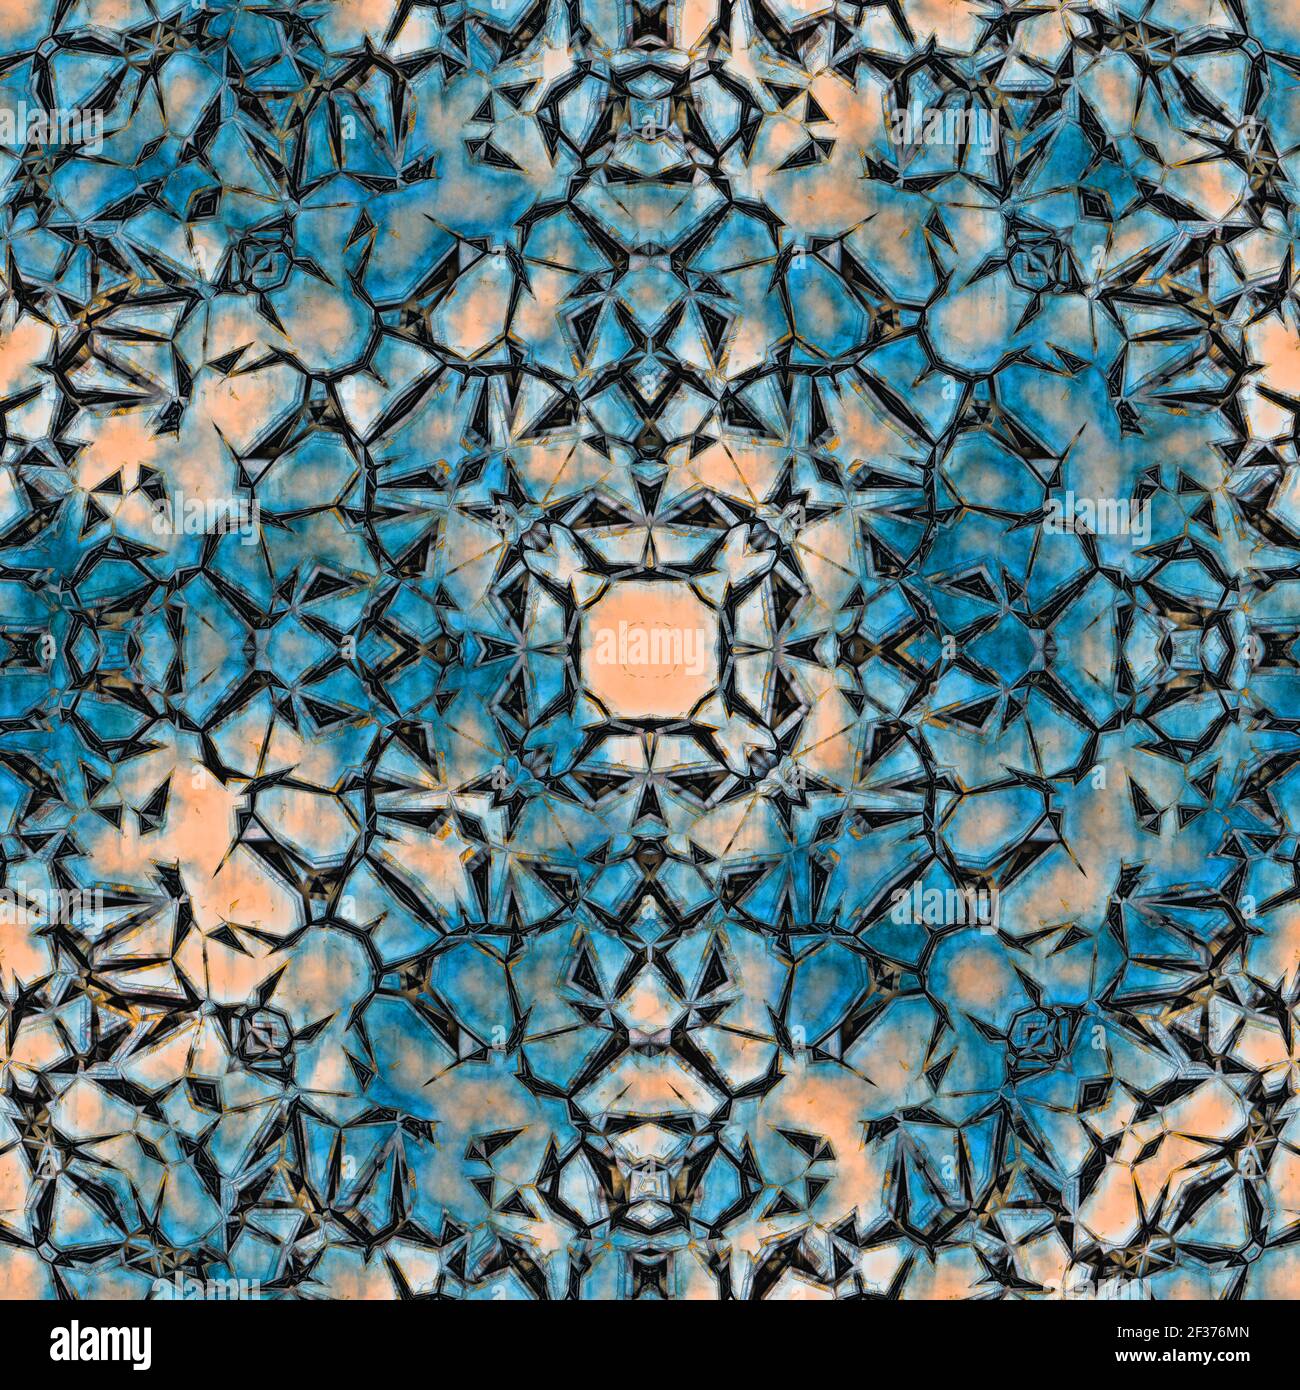 abstract background with rusty metal seamless kaleidoscope pattern, blue hue. Digitally created 3d illustration Stock Photo